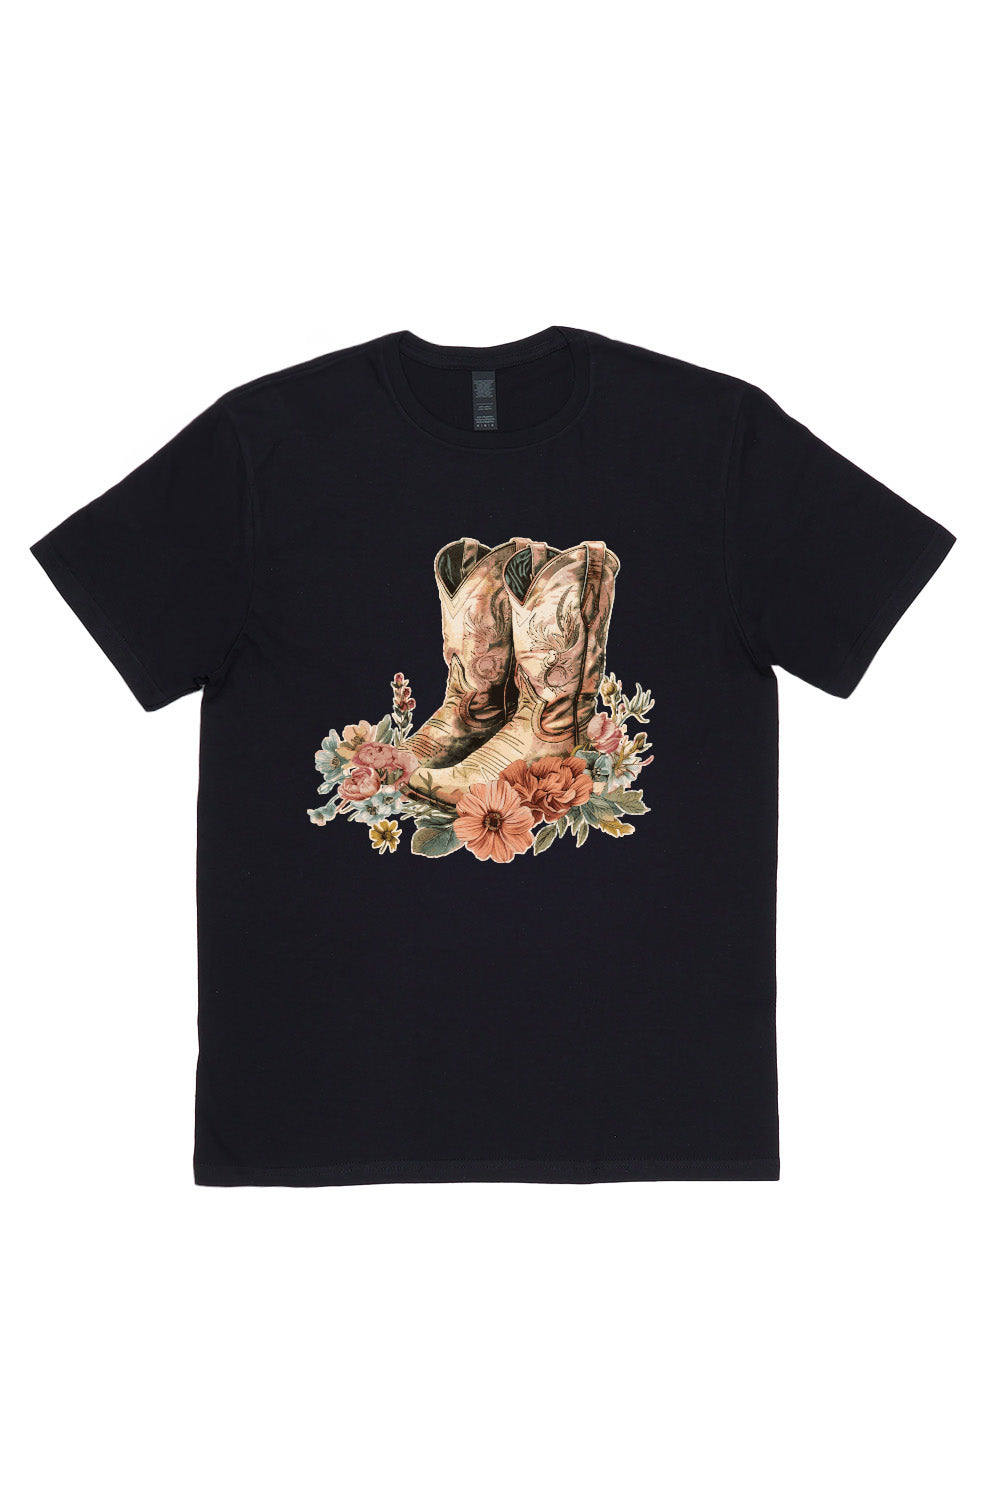 Cowboy boots with flowers T-Shirt in Black (Custom Packs)